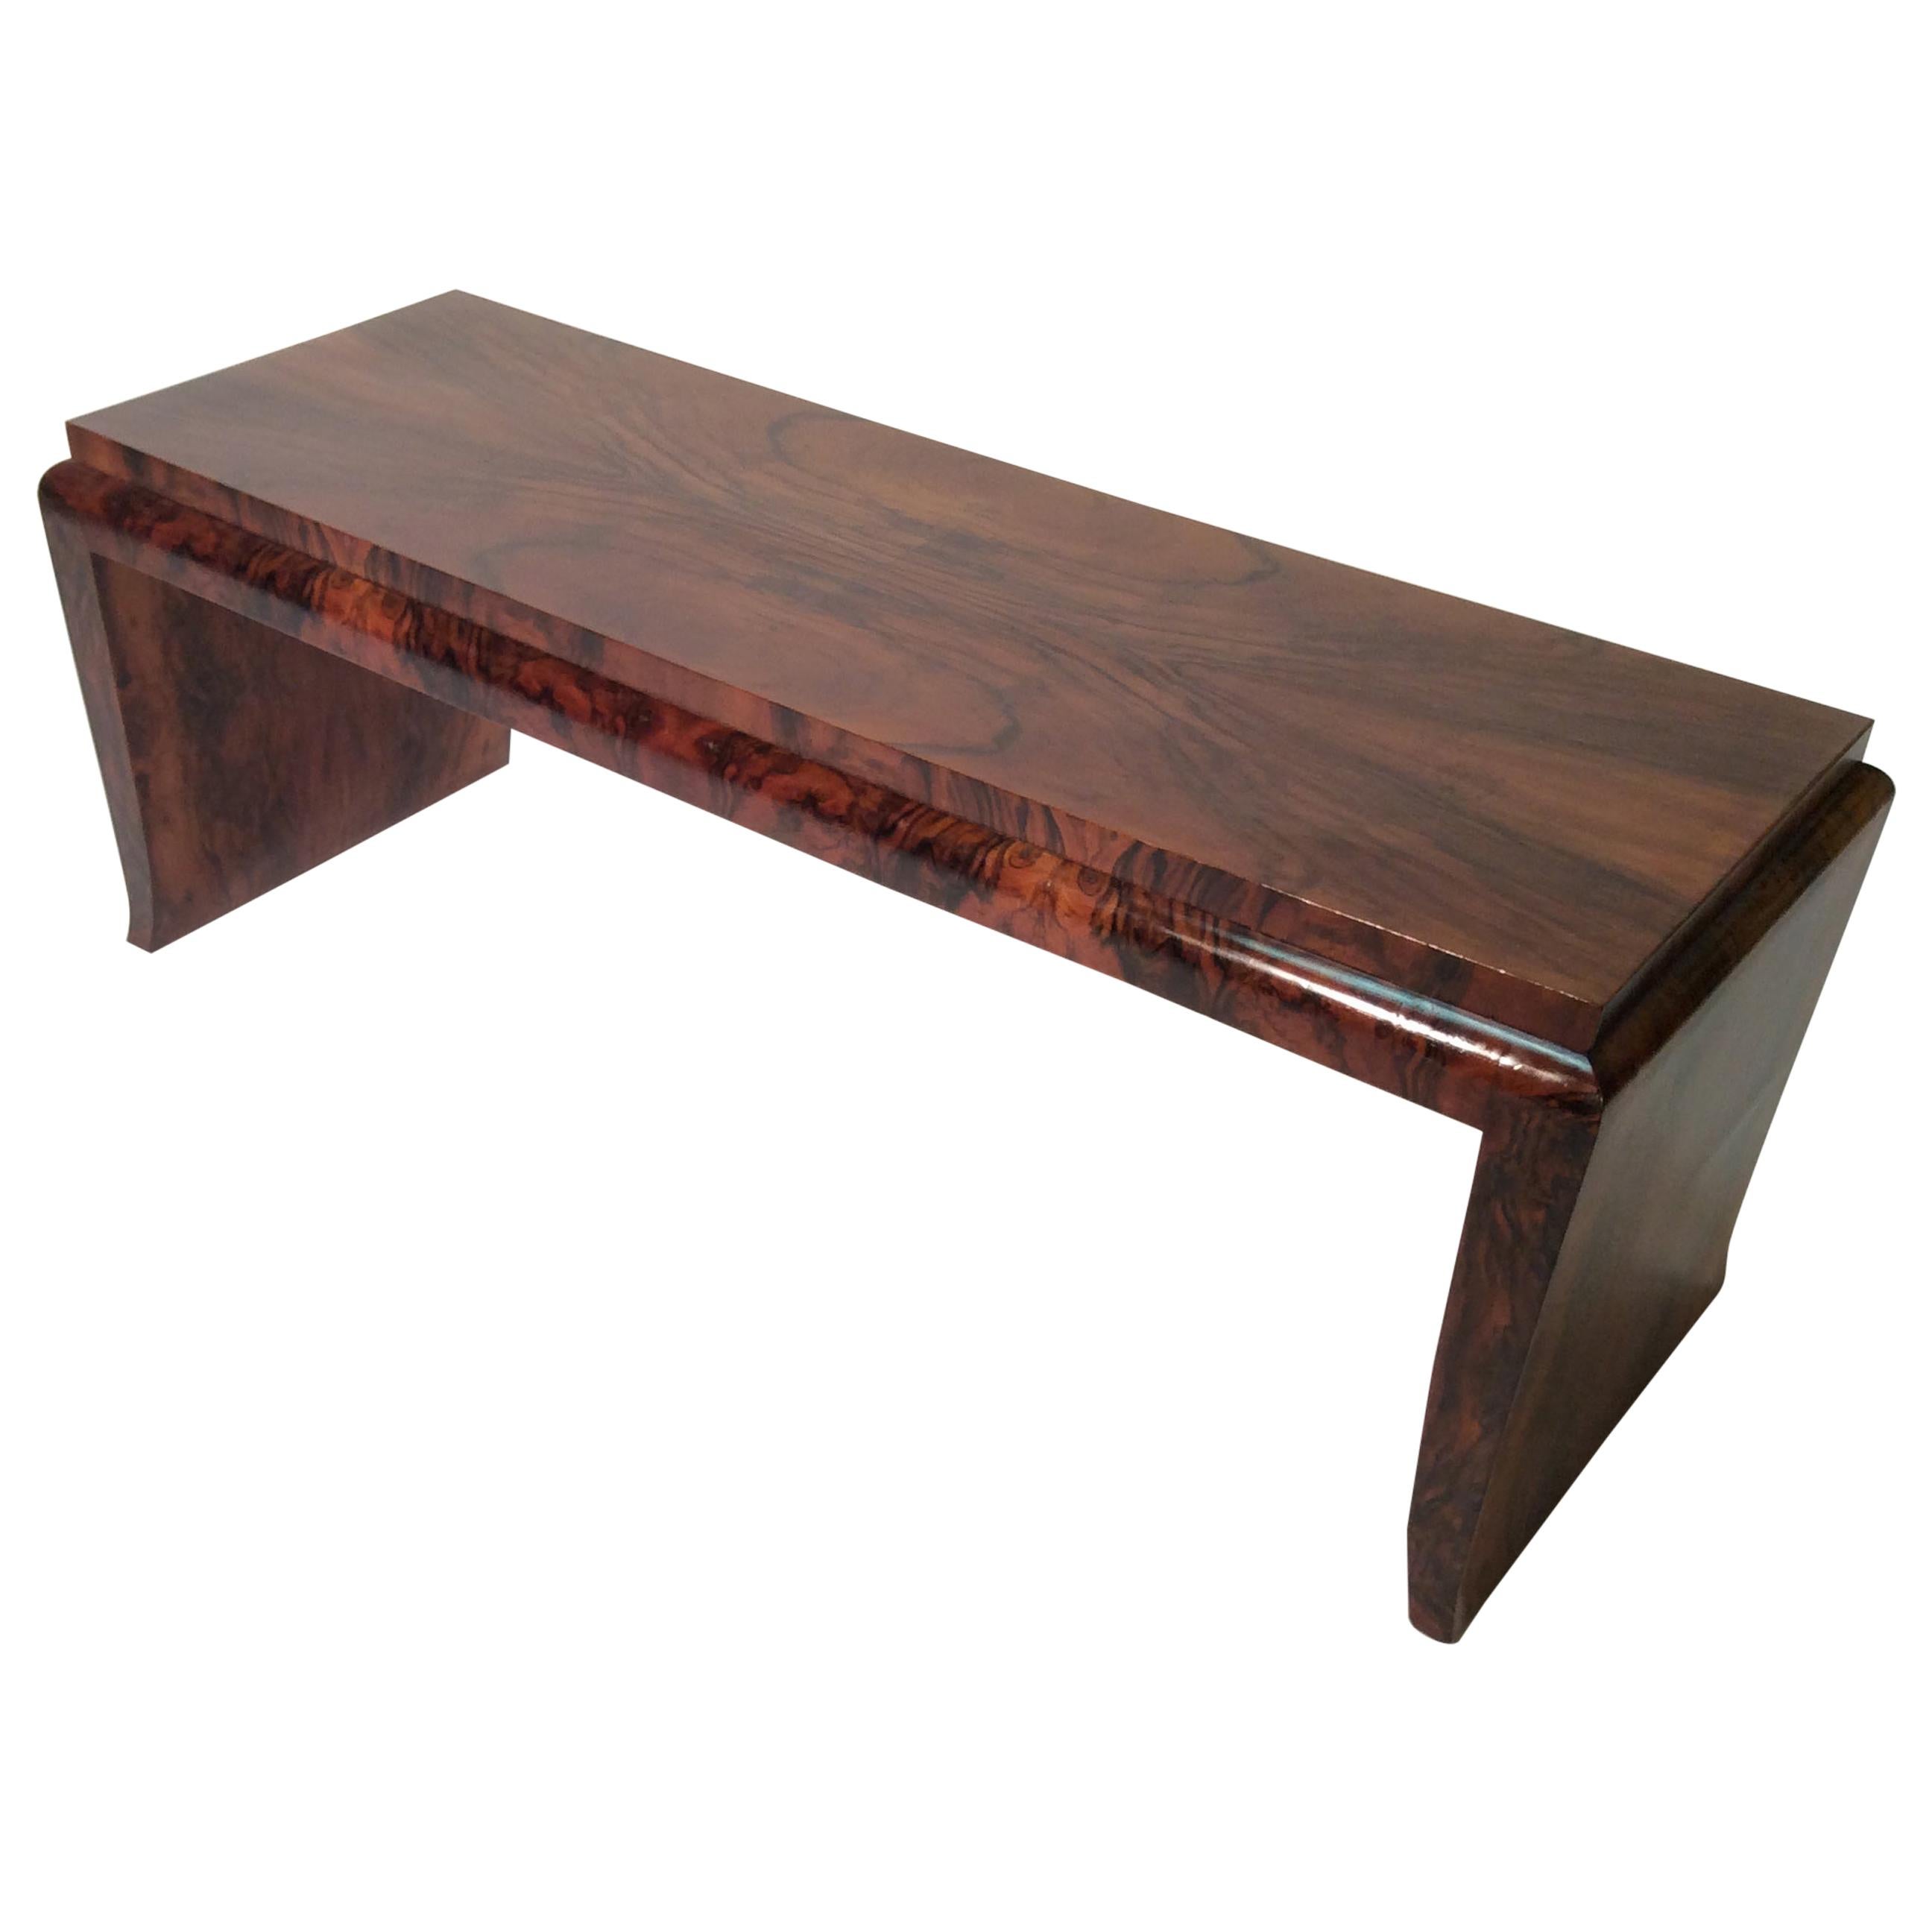 Art Deco Rectangular Coffee Table or Bench with Precious and Elegant Material